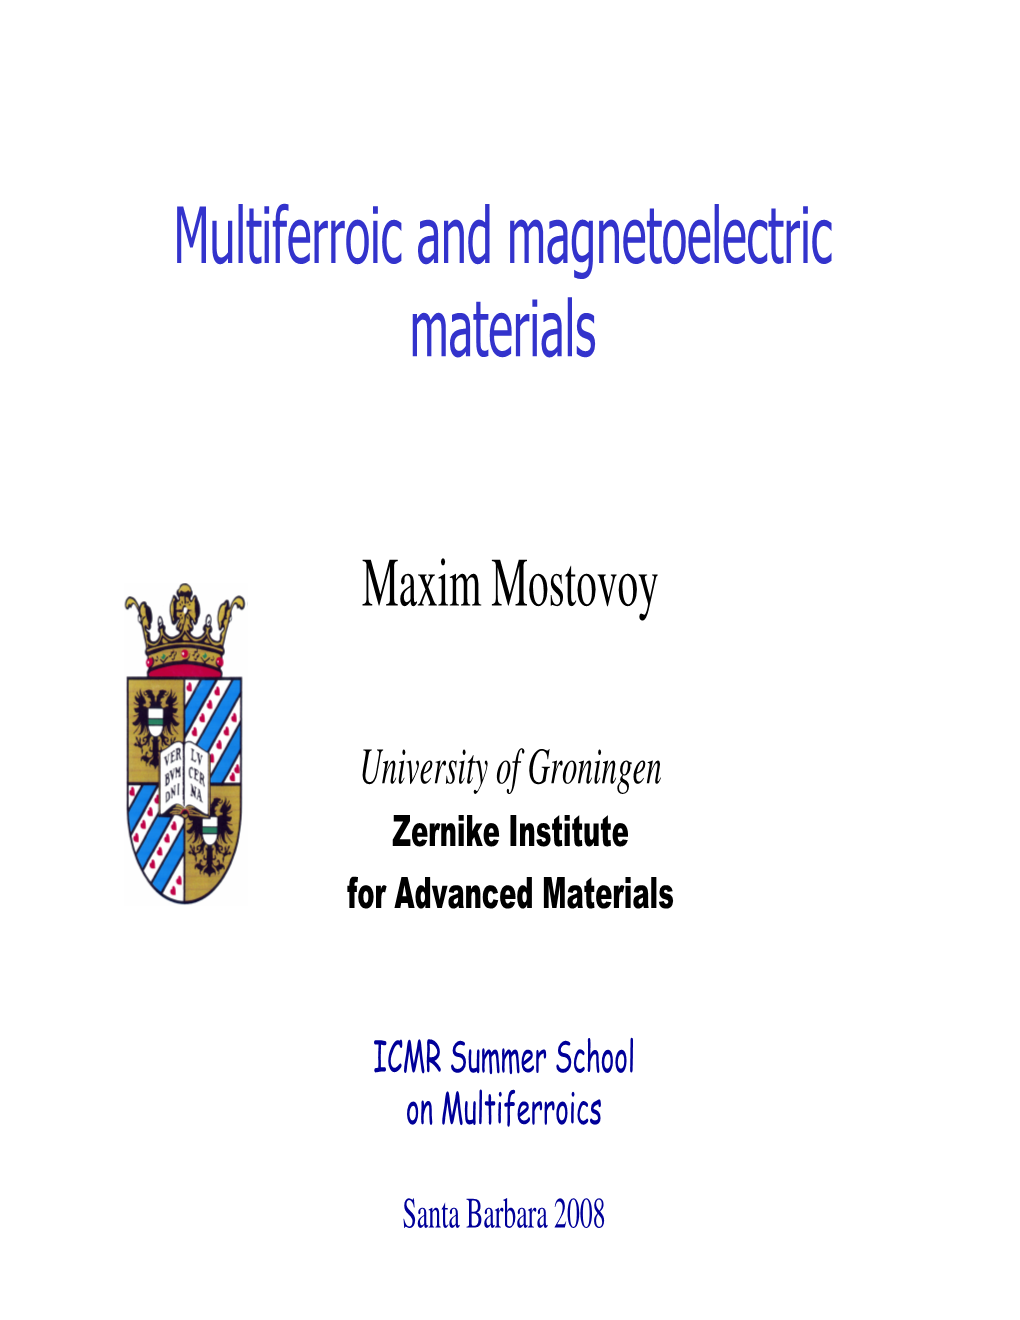 Multiferroic and Magnetoelectric Materials 2